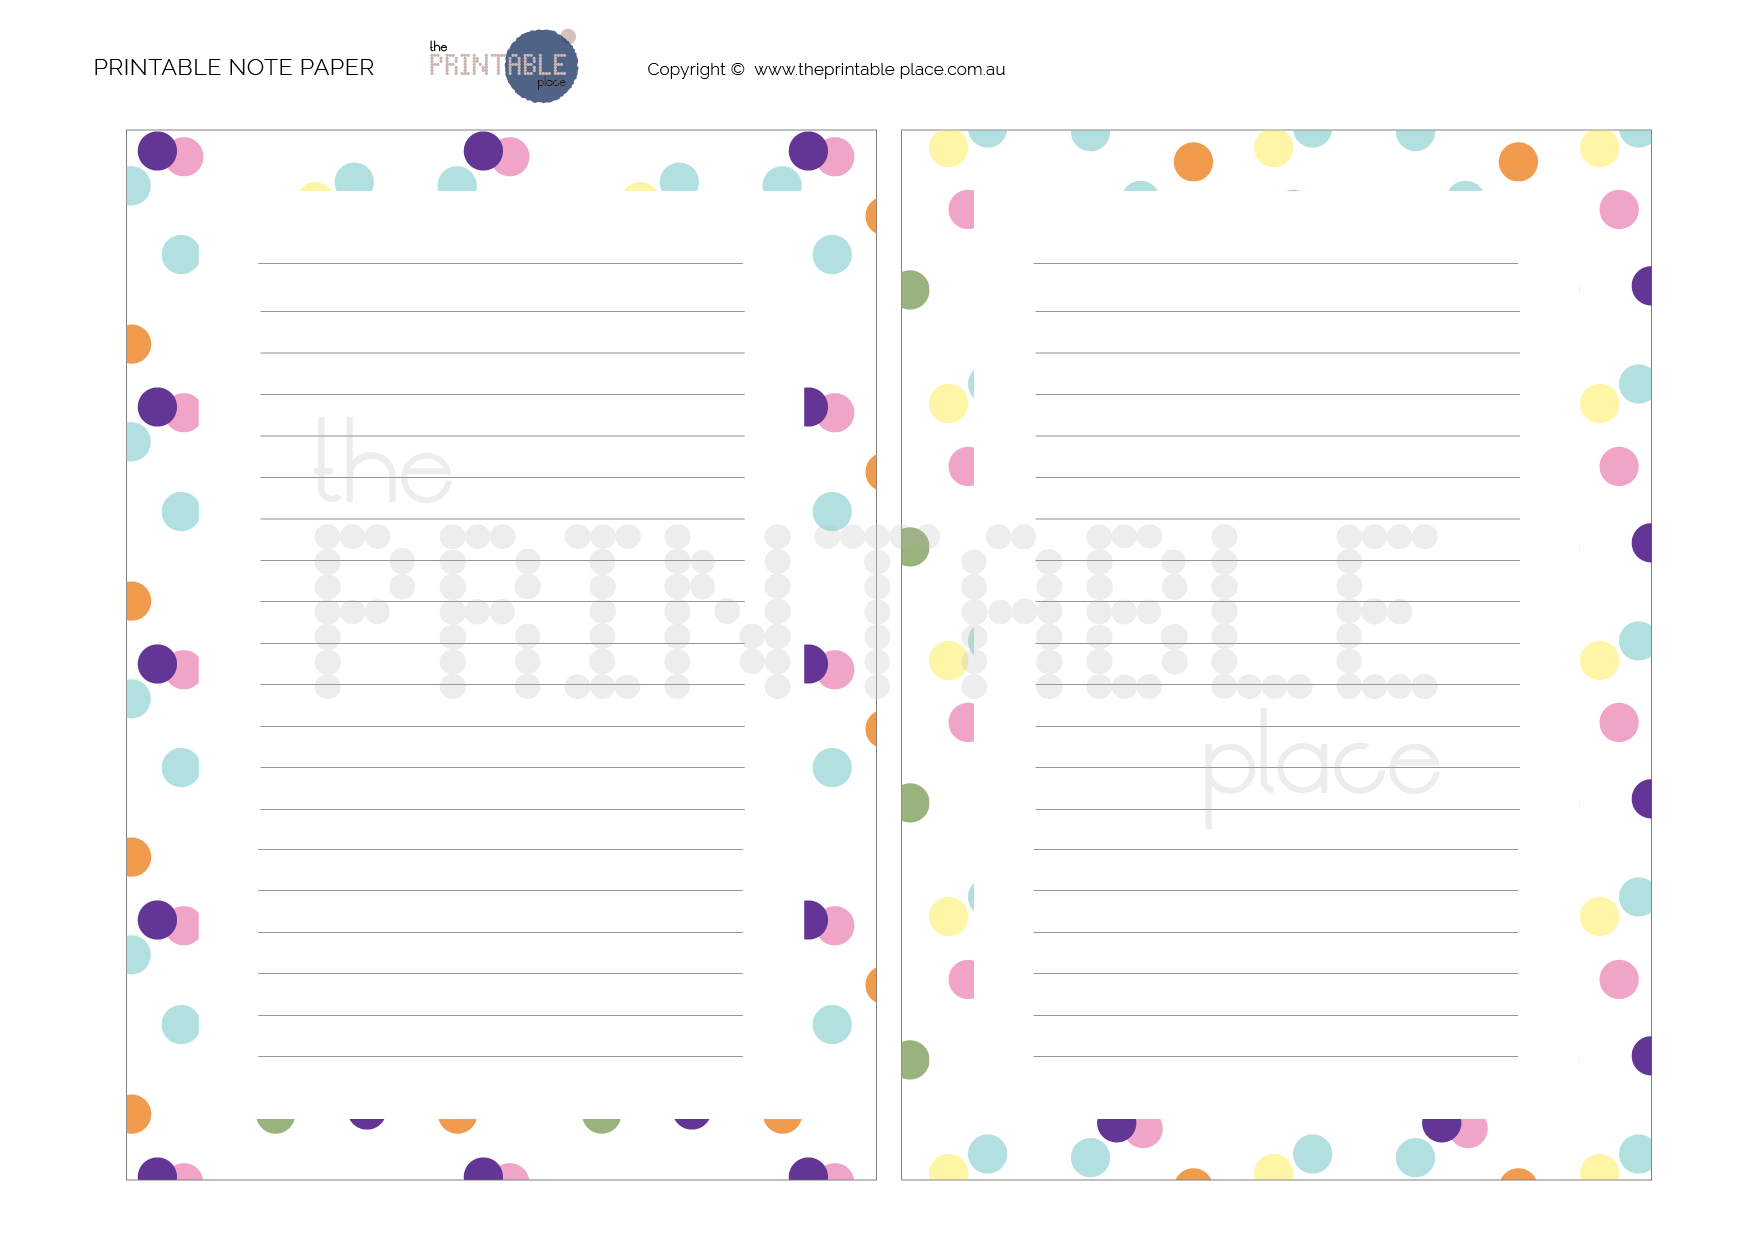 Very Confetti Printable Note Paper-the-printable-place.myshopify.com-Note Paper